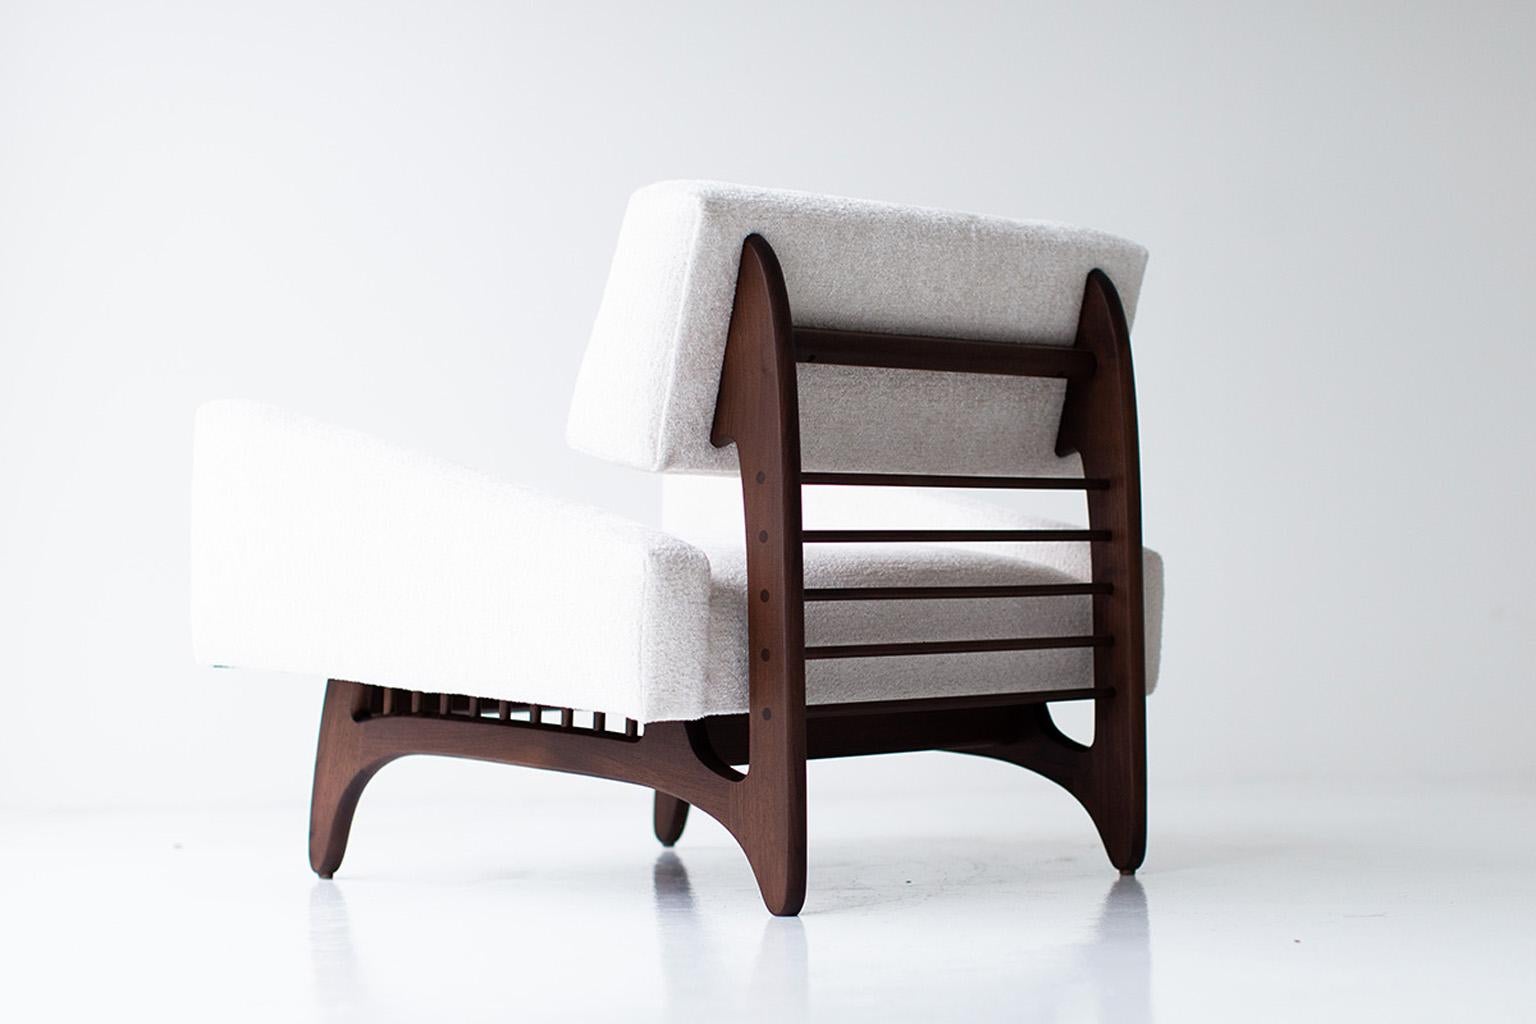 CraftAssociates Lounge Chair, Vancouver Modern Lounge Chair, White and Walnut

This Vancouver Modern Lounge Chair for Craft Associates® Furniture are expertly crafted and upholstered. Each chair boasts hand cut foam and high grade commercial fabric.